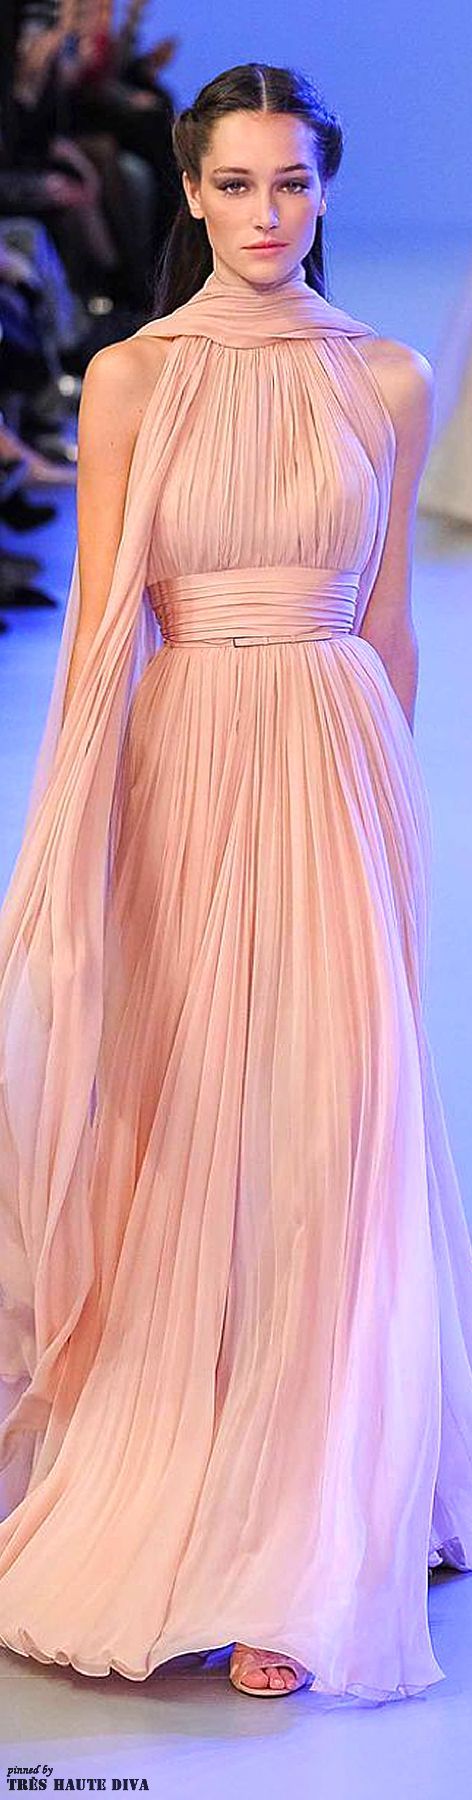 Elie Saab Spring 2014 Couture | Keep The Glamour, ~LadyLuxury~